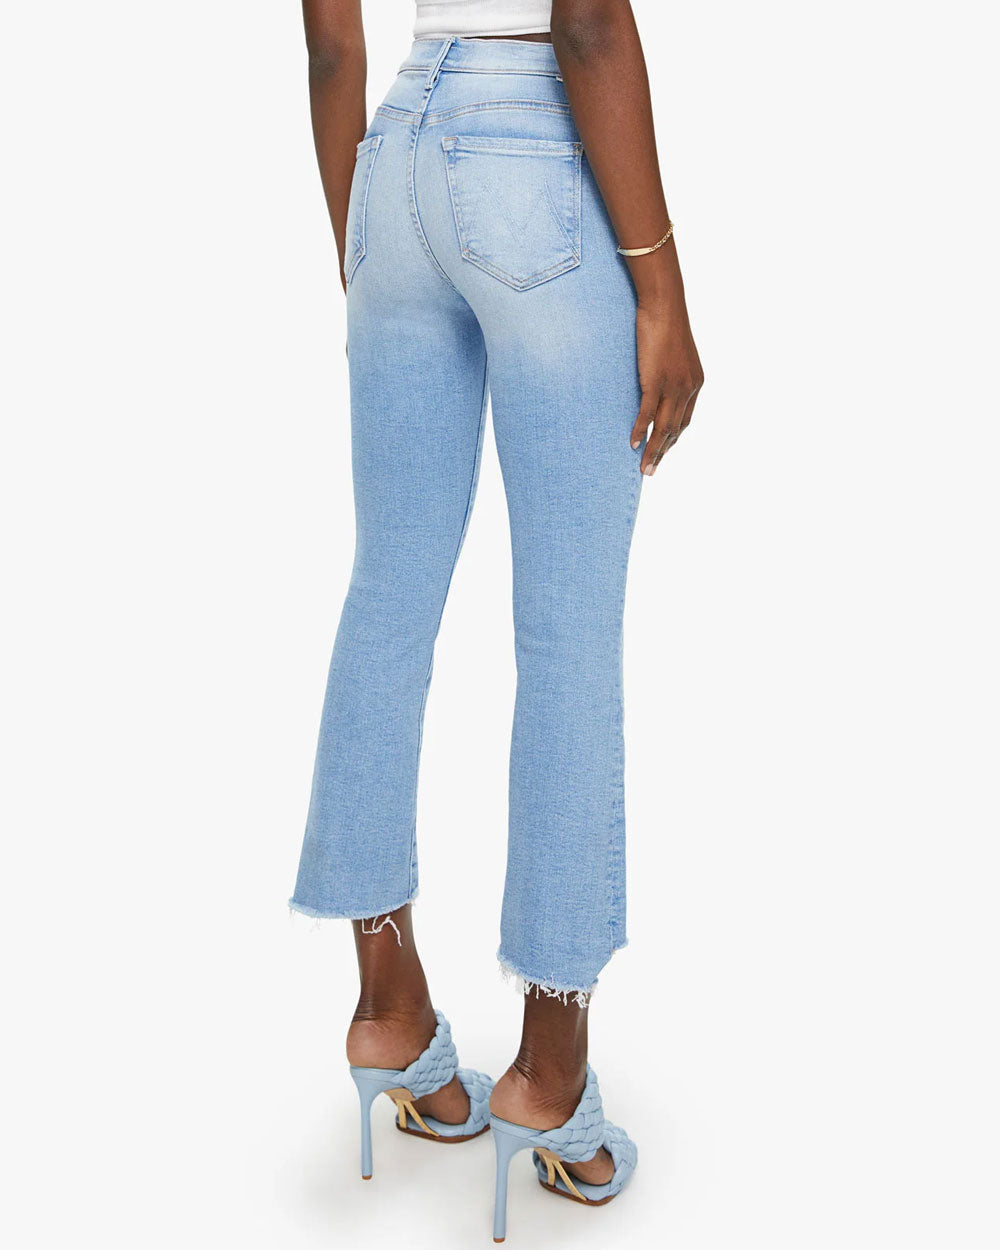 The Insider Crop Step Fray Jean in Limited Edition